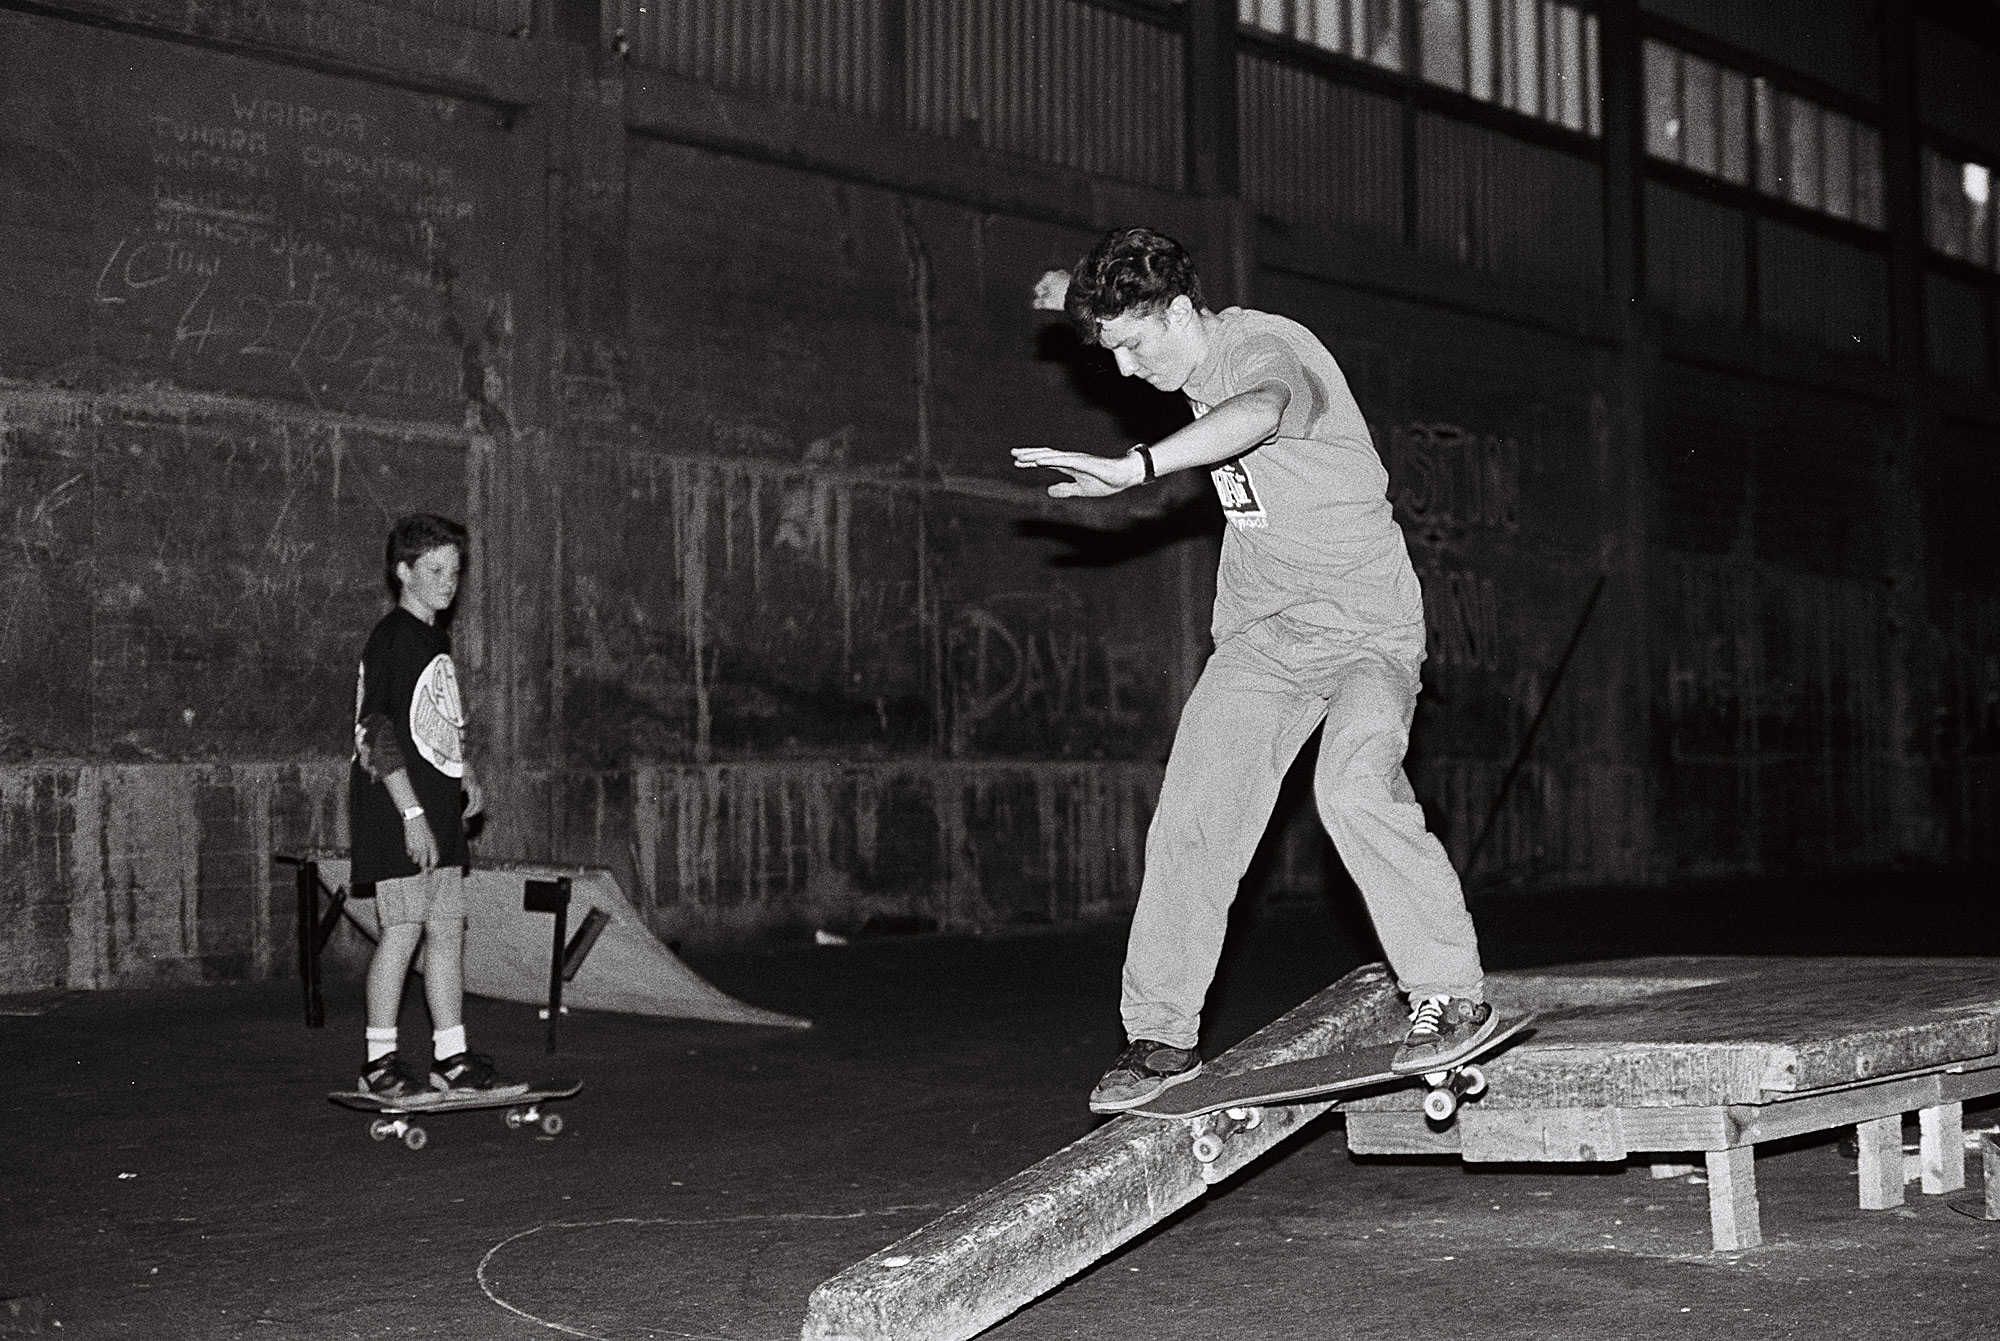 Chris Scott performing a frontside tailslide on a concrete parking block at The Skate Pit in Wellington, 1990.